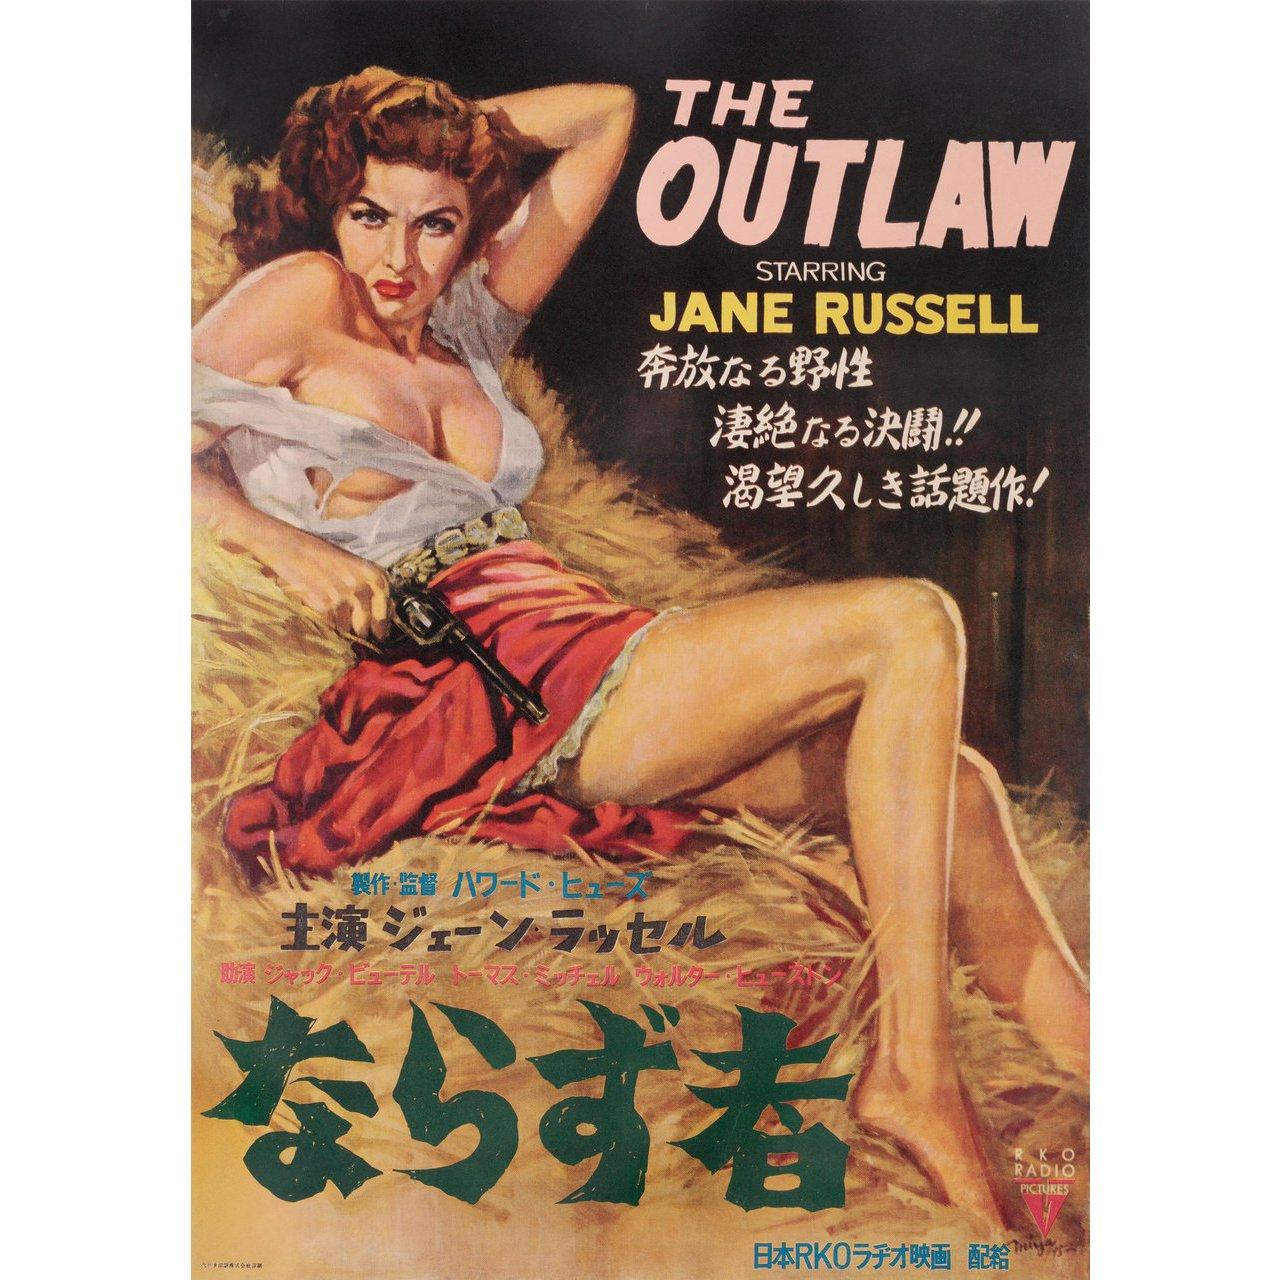 Original 1952 Japanese B2 poster for the first Japanese theatrical release of the 1943 film The Outlaw directed by Howard Hughes / Howard Hawks with Jack Buetel / Jane Russell / Thomas Mitchell / Walter Huston. Fine condition, linen-backed. This